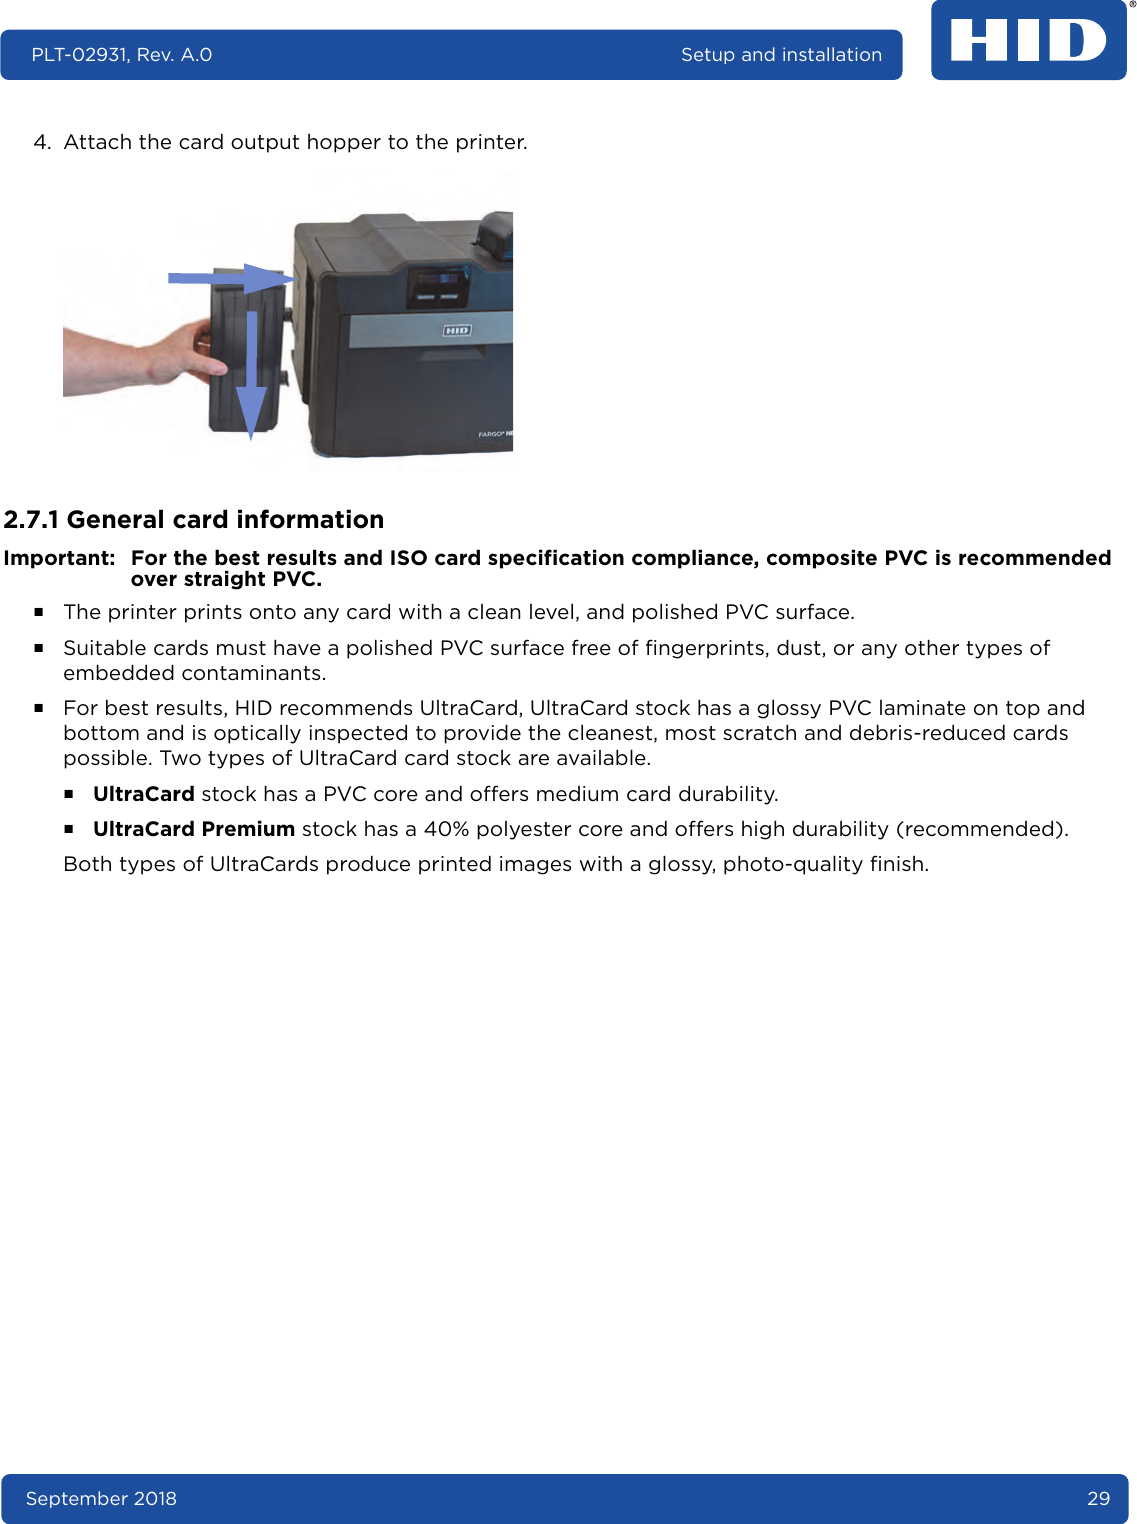 September 2018 29PLT-02931, Rev. A.0 Setup and installation4. Attach the card output hopper to the printer. 2.7.1 General card informationImportant: For the best results and ISO card specification compliance, composite PVC is recommended over straight PVC.႑The printer prints onto any card with a clean level, and polished PVC surface.႑Suitable cards must have a polished PVC surface free of fingerprints, dust, or any other types of embedded contaminants.႑For best results, HID recommends UltraCard, UltraCard stock has a glossy PVC laminate on top and bottom and is optically inspected to provide the cleanest, most scratch and debris-reduced cards possible. Two types of UltraCard card stock are available.႑UltraCard stock has a PVC core and offers medium card durability.႑UltraCard Premium stock has a 40% polyester core and offers high durability (recommended).Both types of UltraCards produce printed images with a glossy, photo-quality finish.